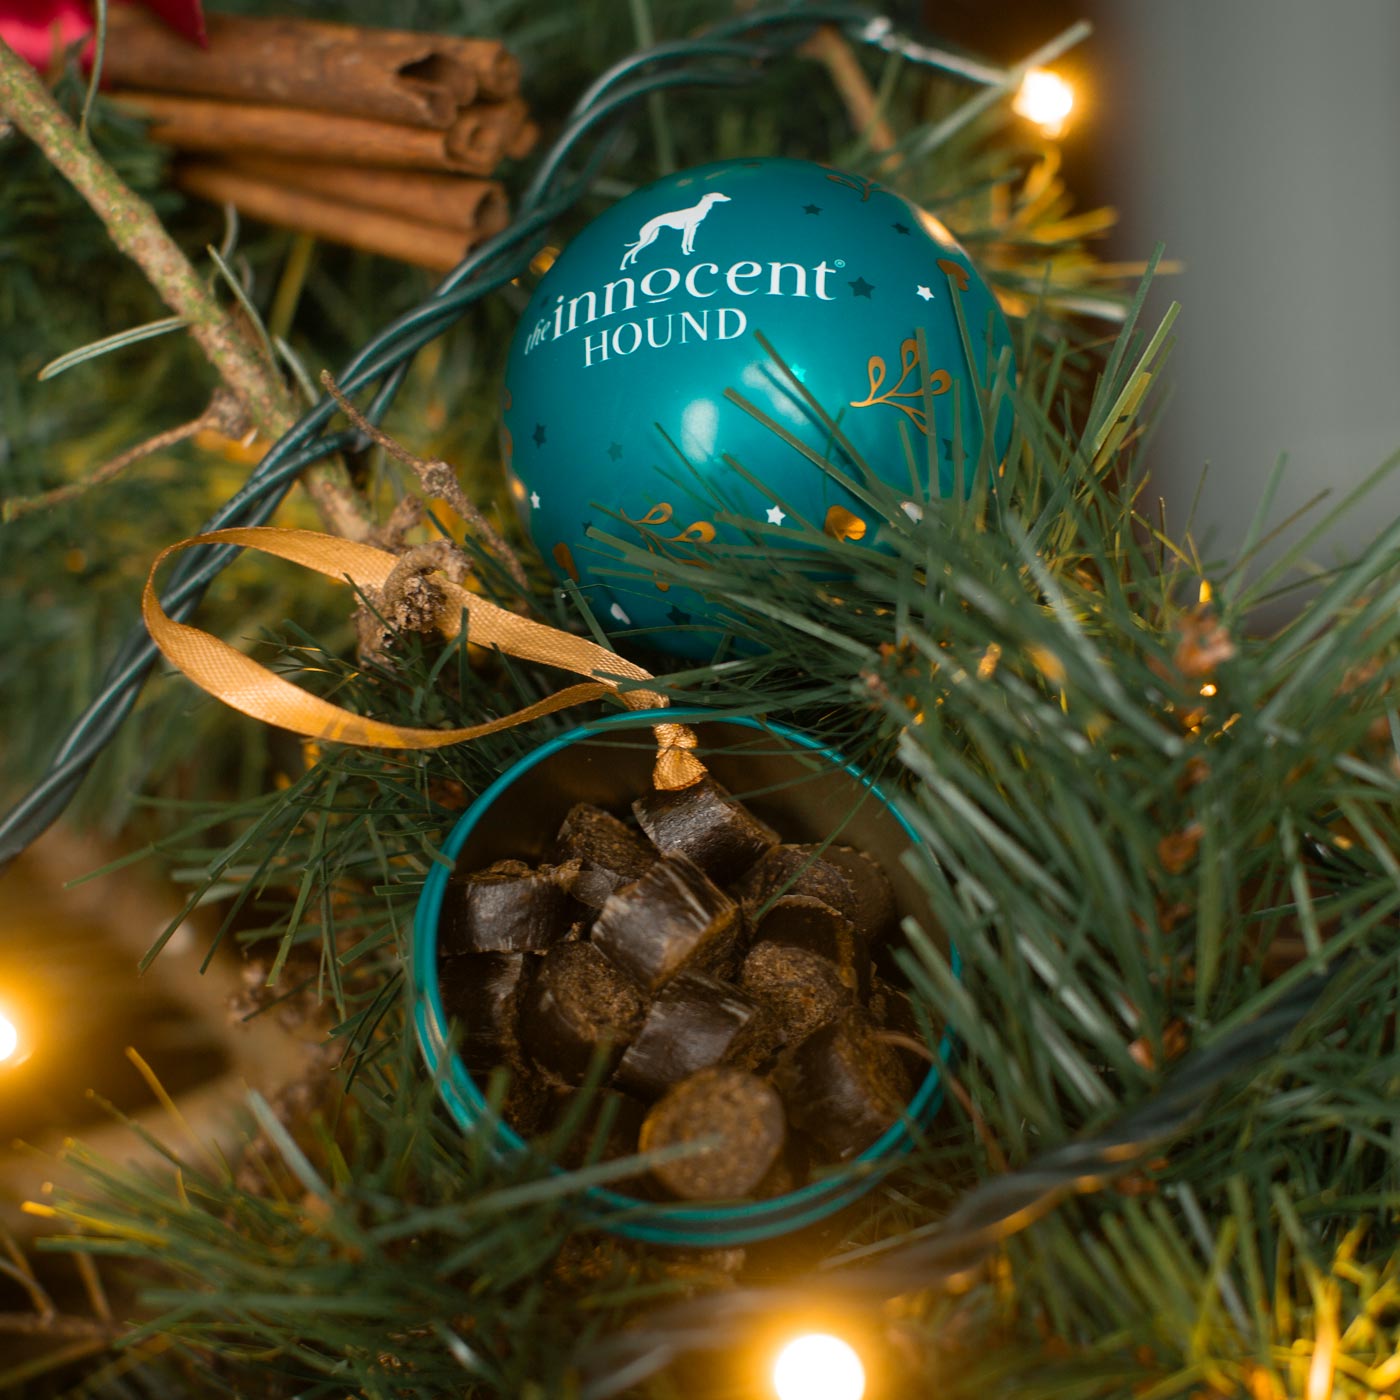 The Innocent Hound Christmas Treat Bauble